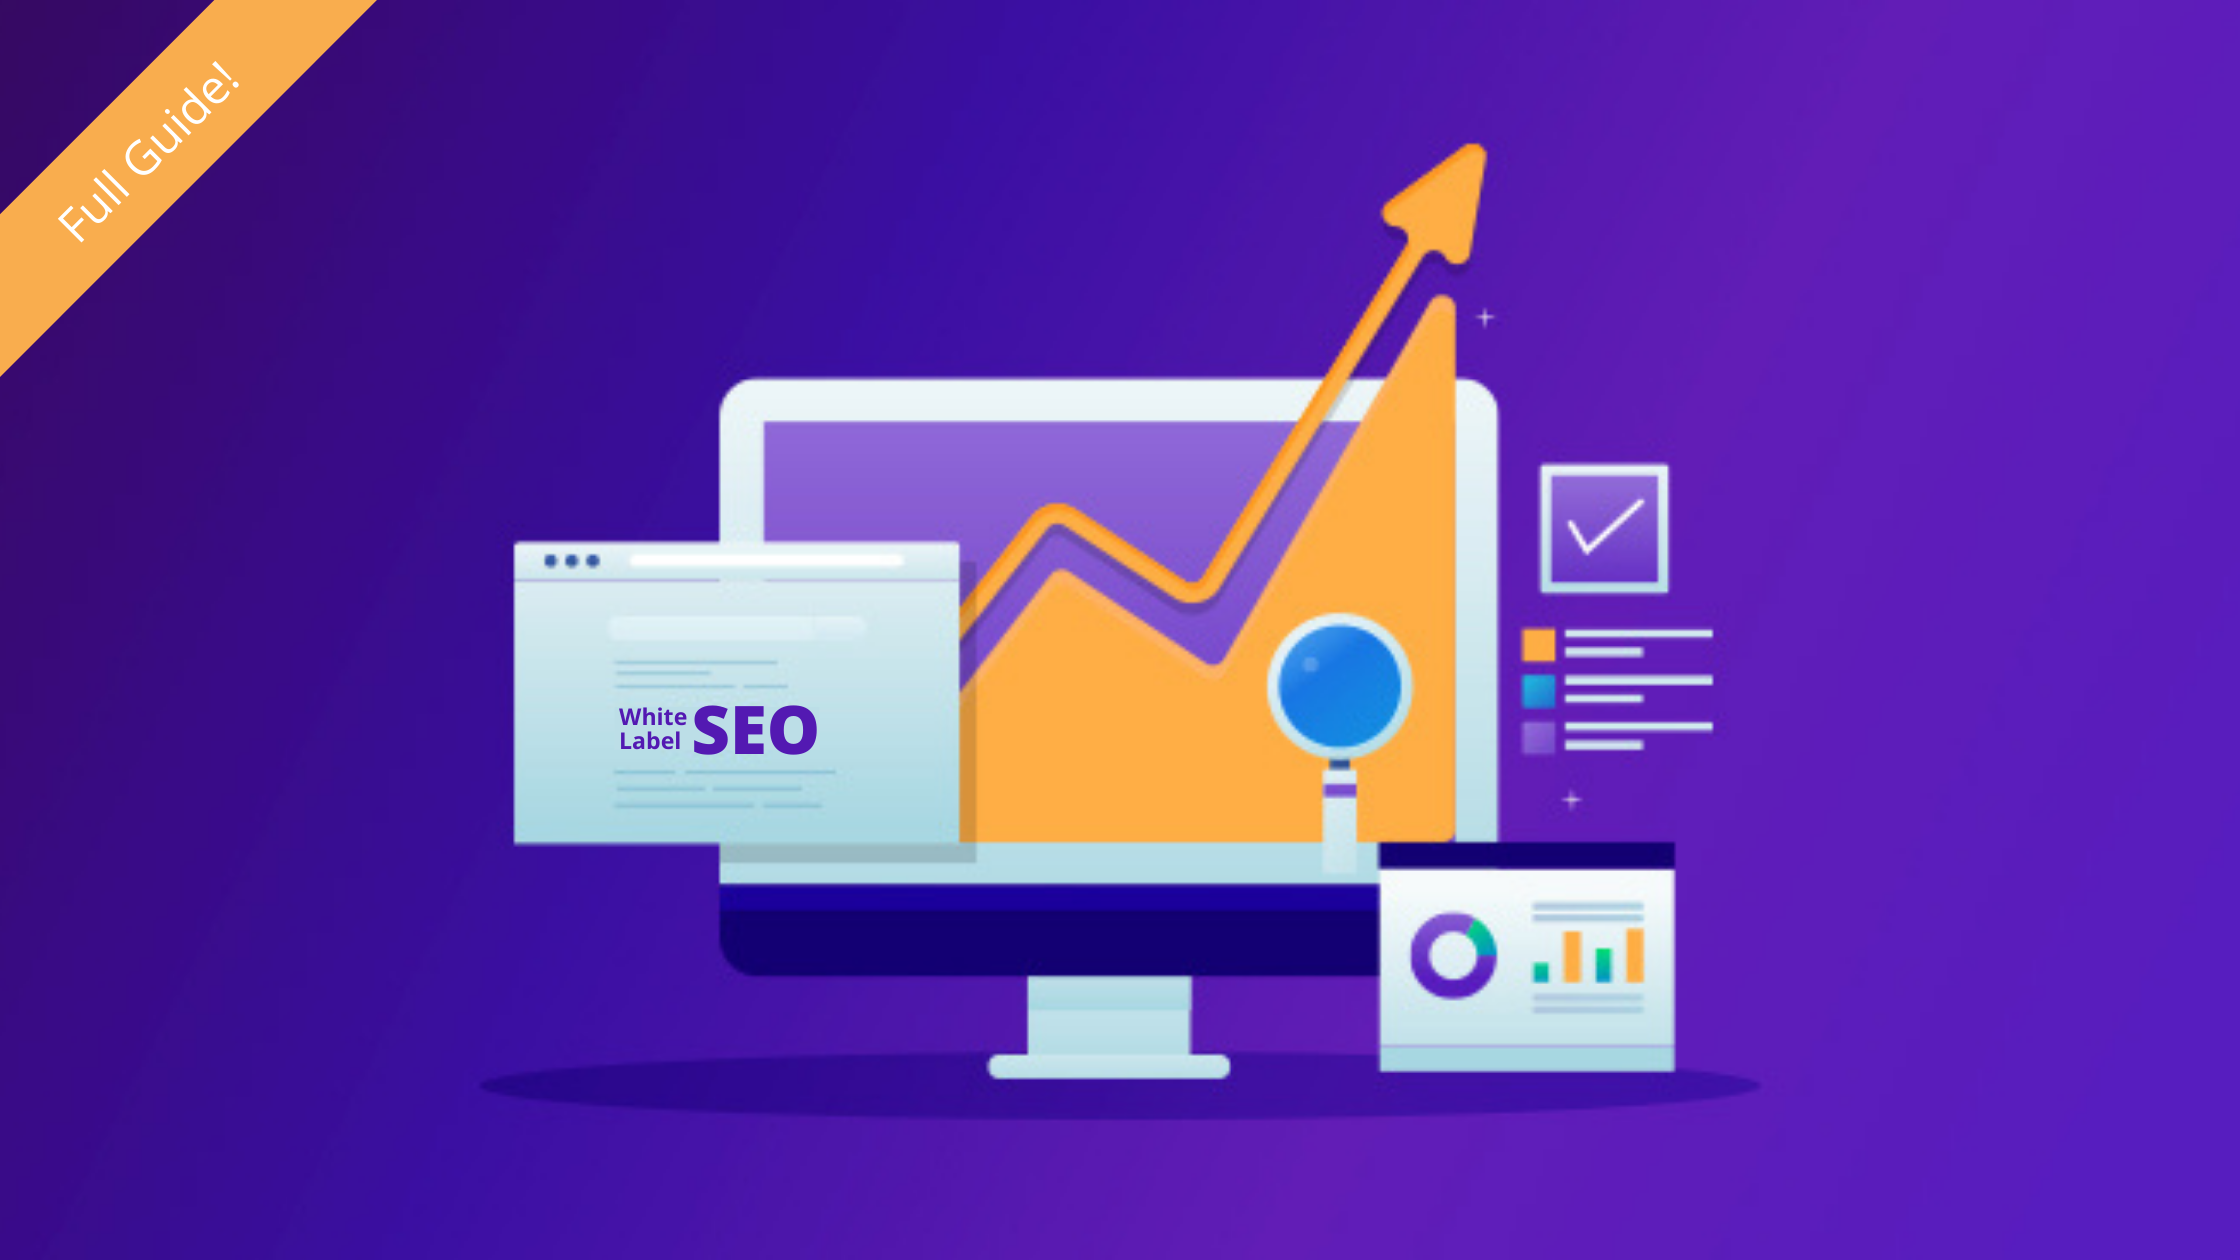 White label seo services for businesses that improve the exposure of your website